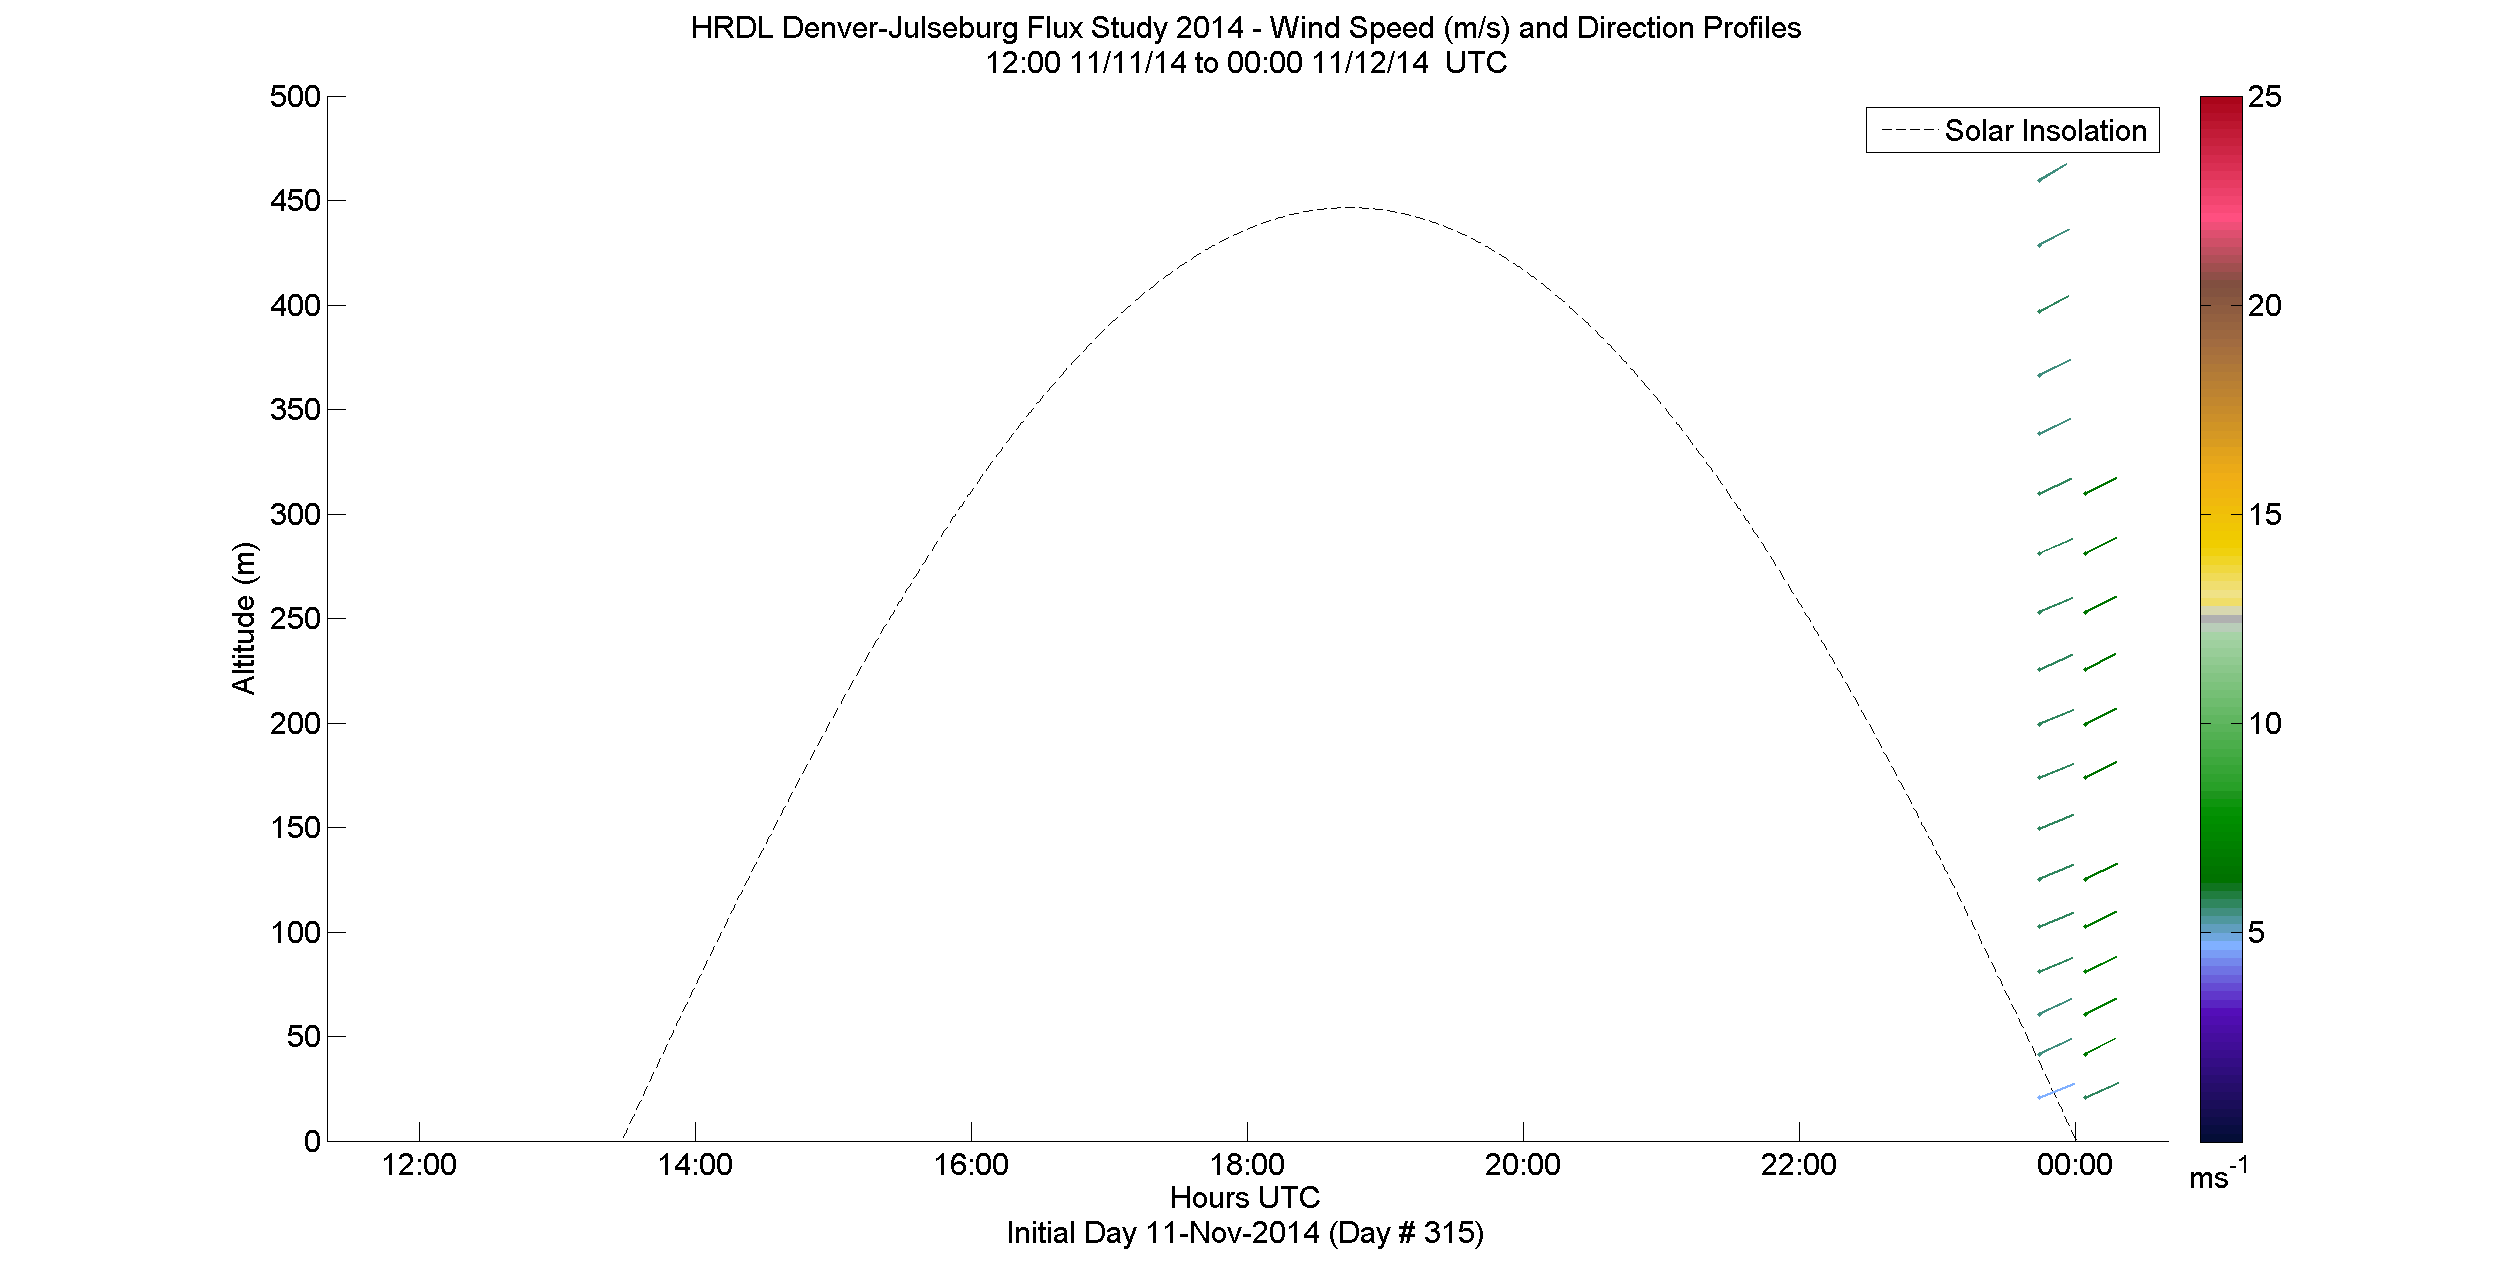 HRDL speed and direction profile - November 11 pm